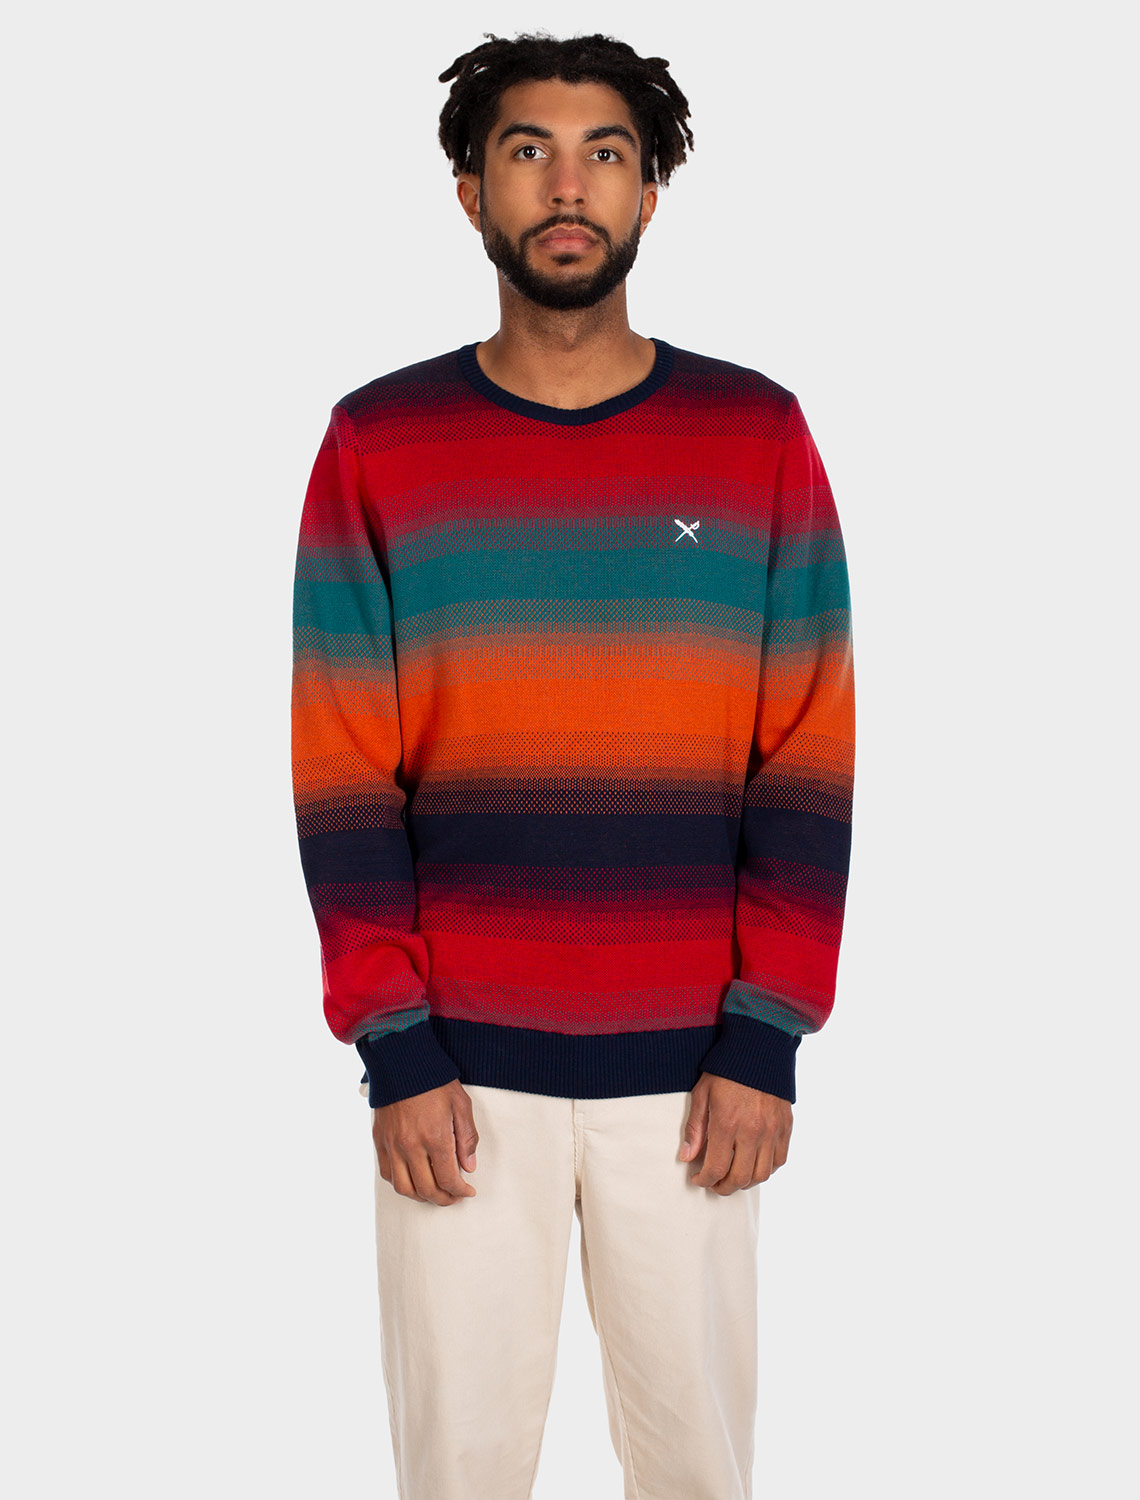 IRIE-DAILY-GRADY-SUMMER-KNIT-Sweater-Pullover-navy-red-3